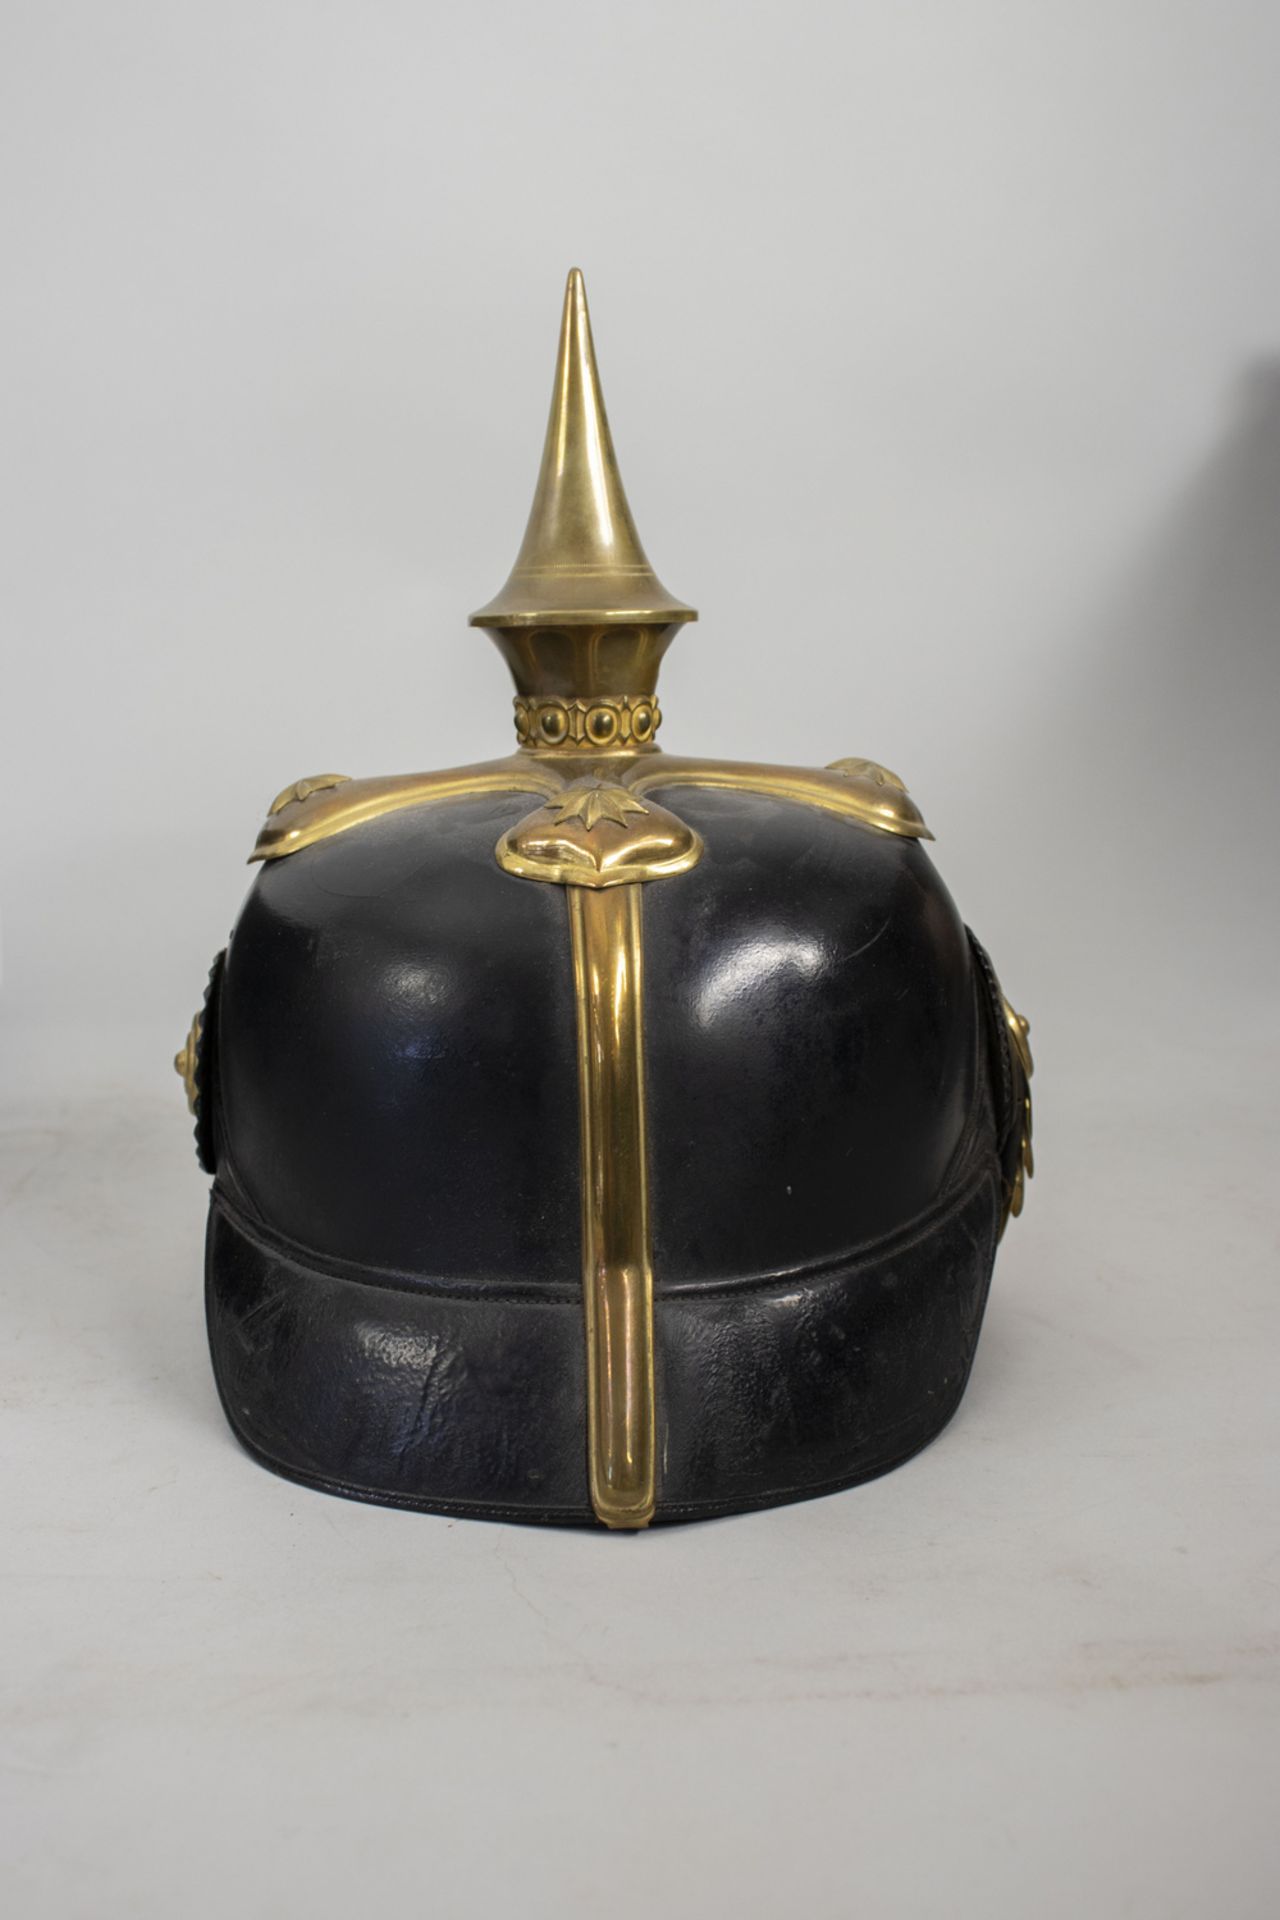 Pickelhaube mit Lederkoffer / A spiked helmet with leather box, Württemberg, um 1910 - Image 5 of 7